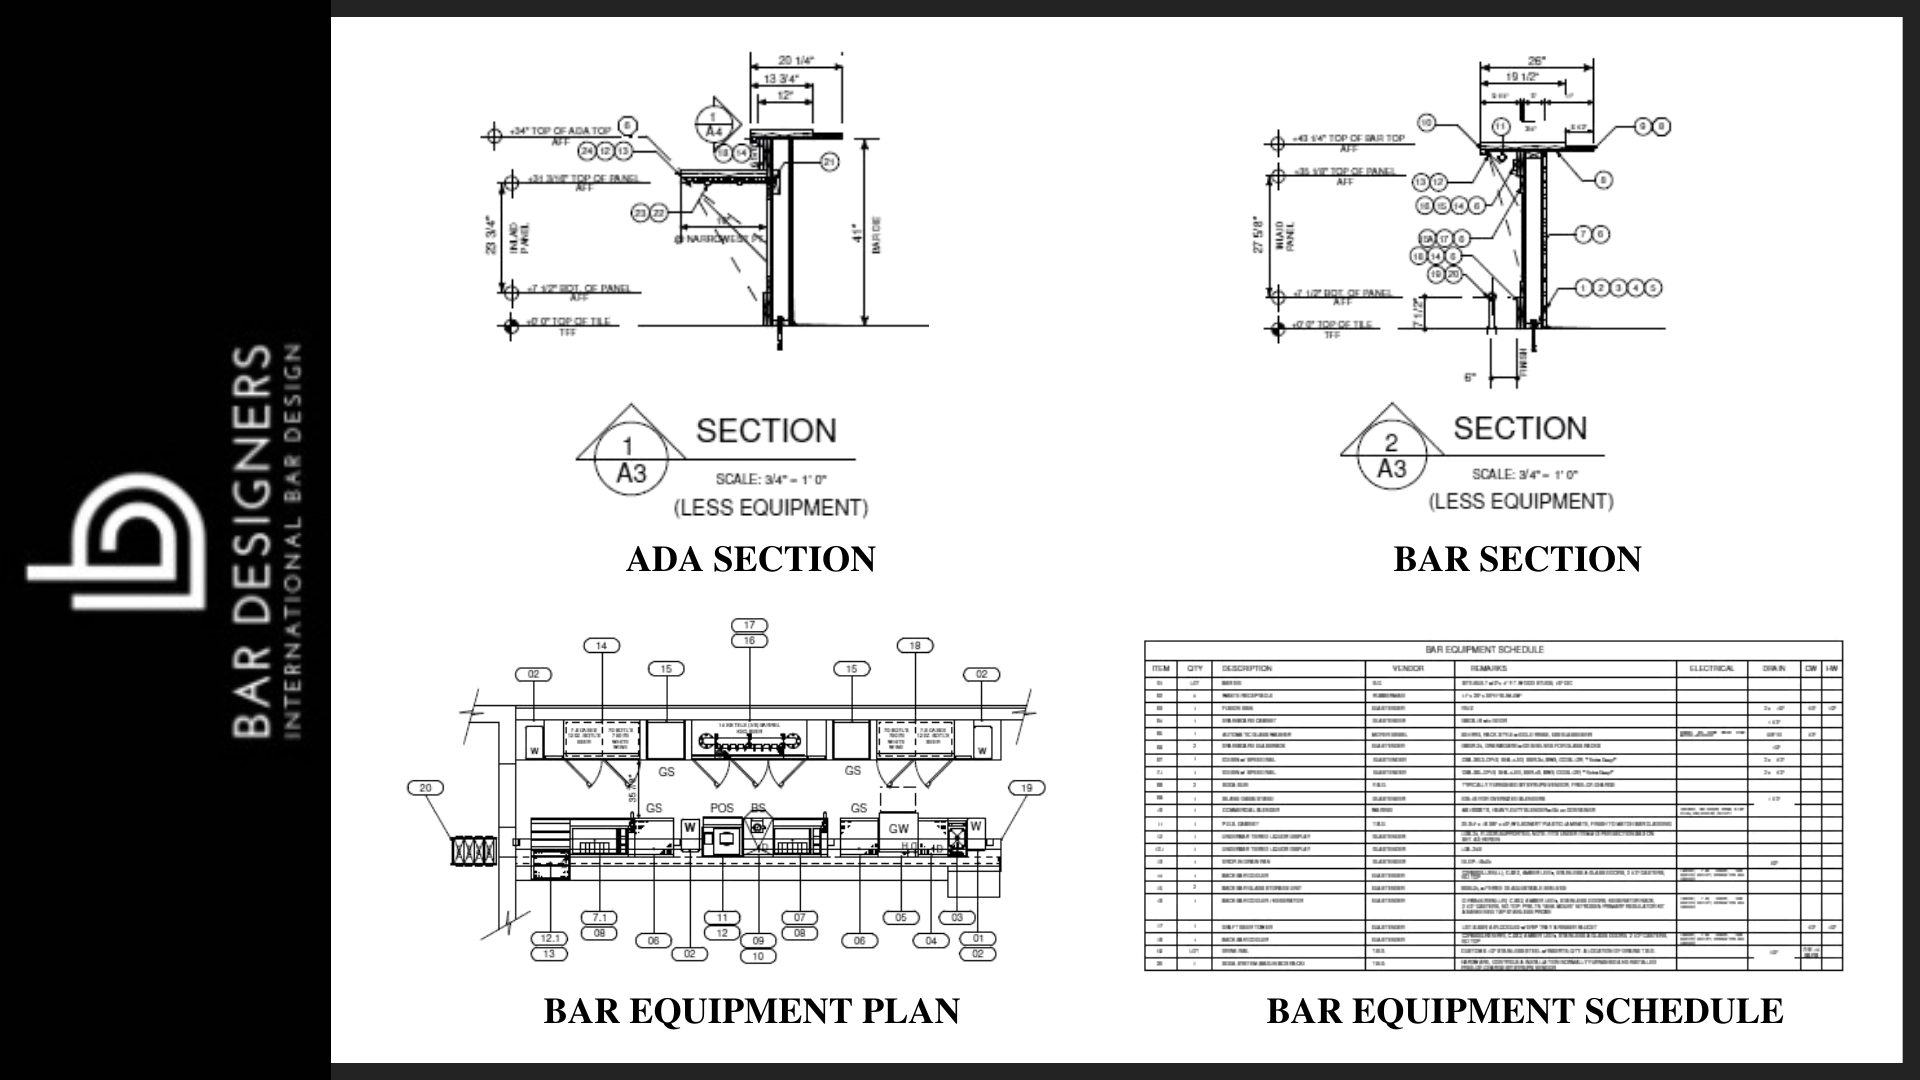 Architectural drawing of initial targeted areas of a typical commercial bar design